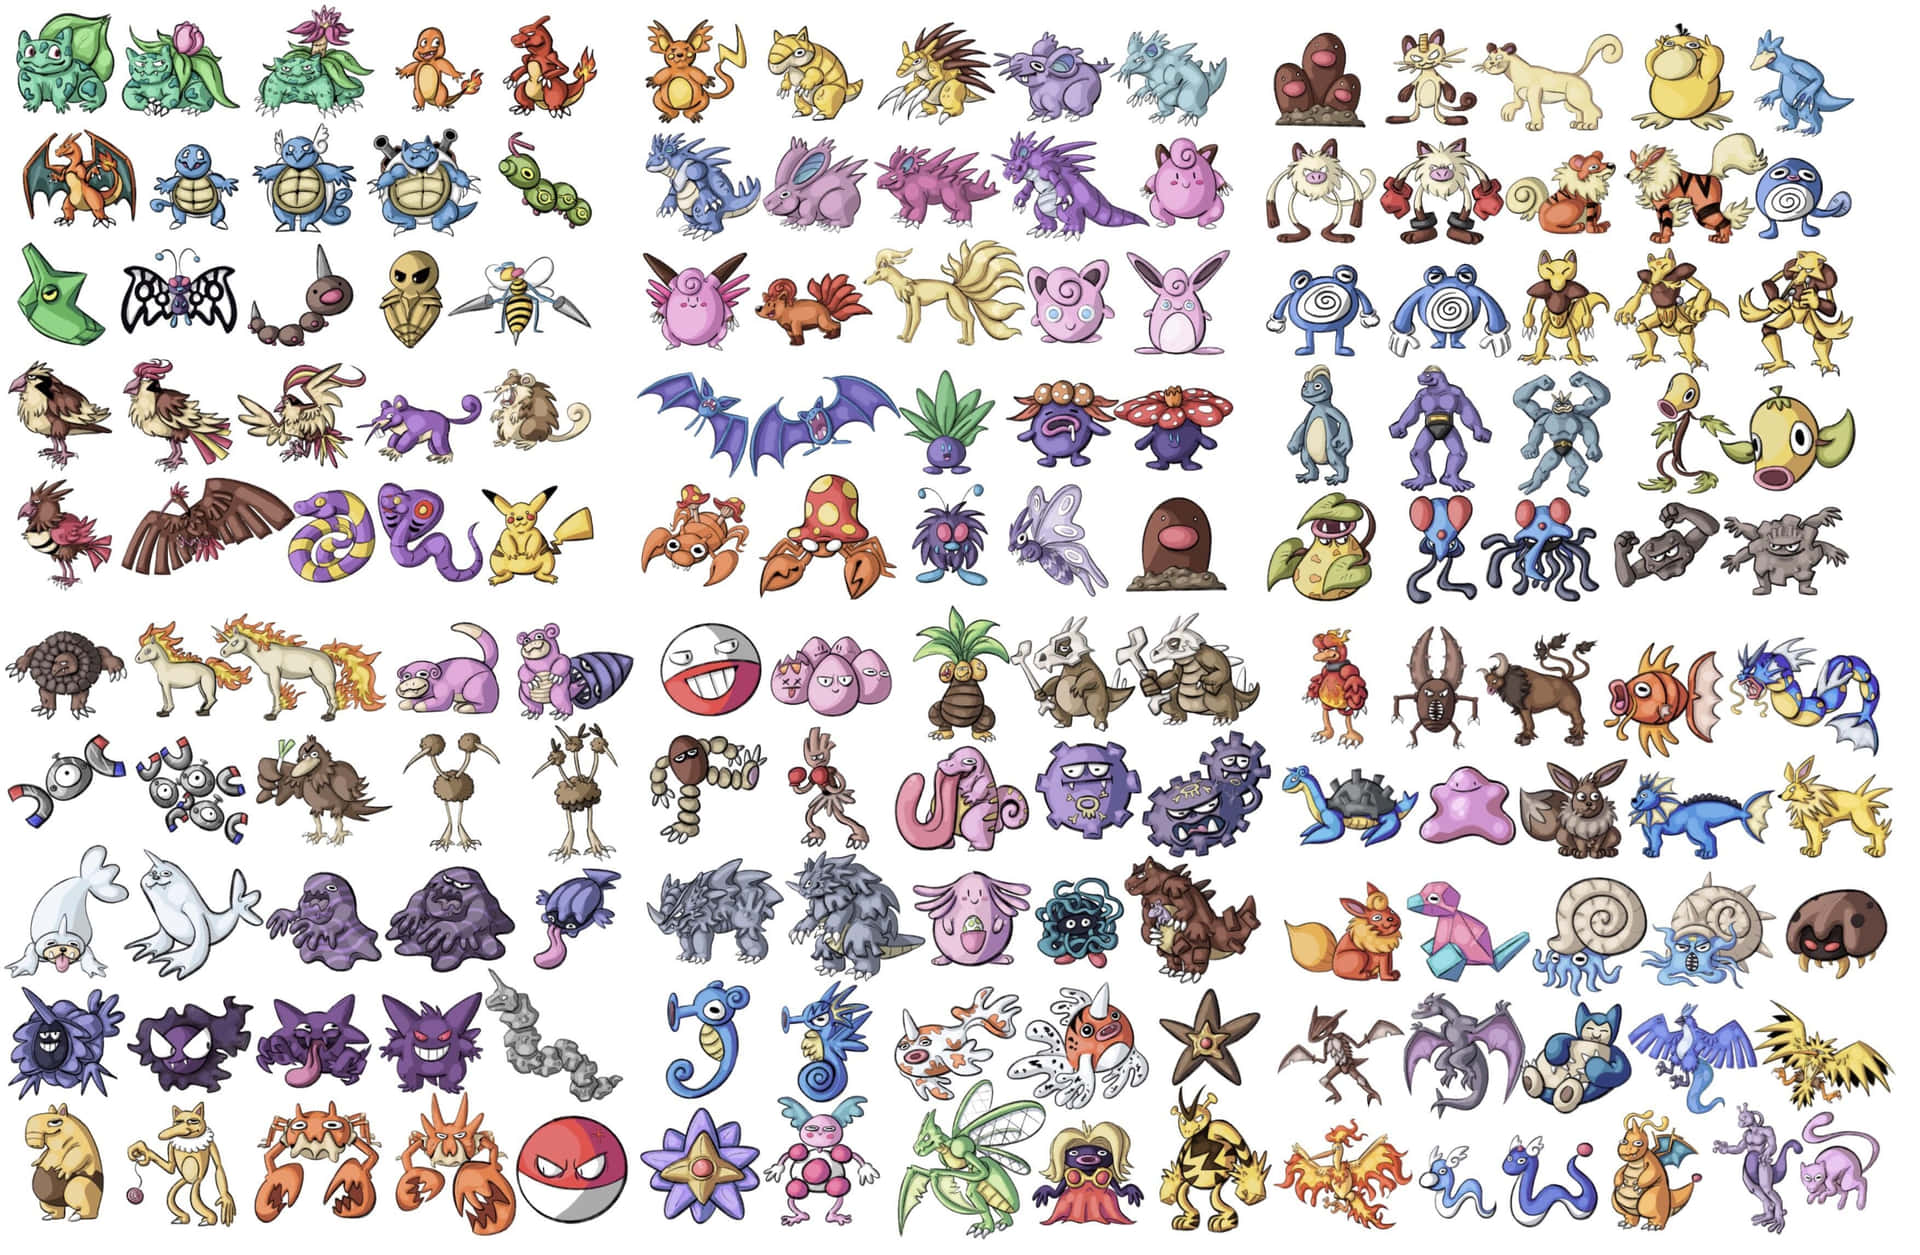 Pokemon - A Collection Of Different Pokemon Characters